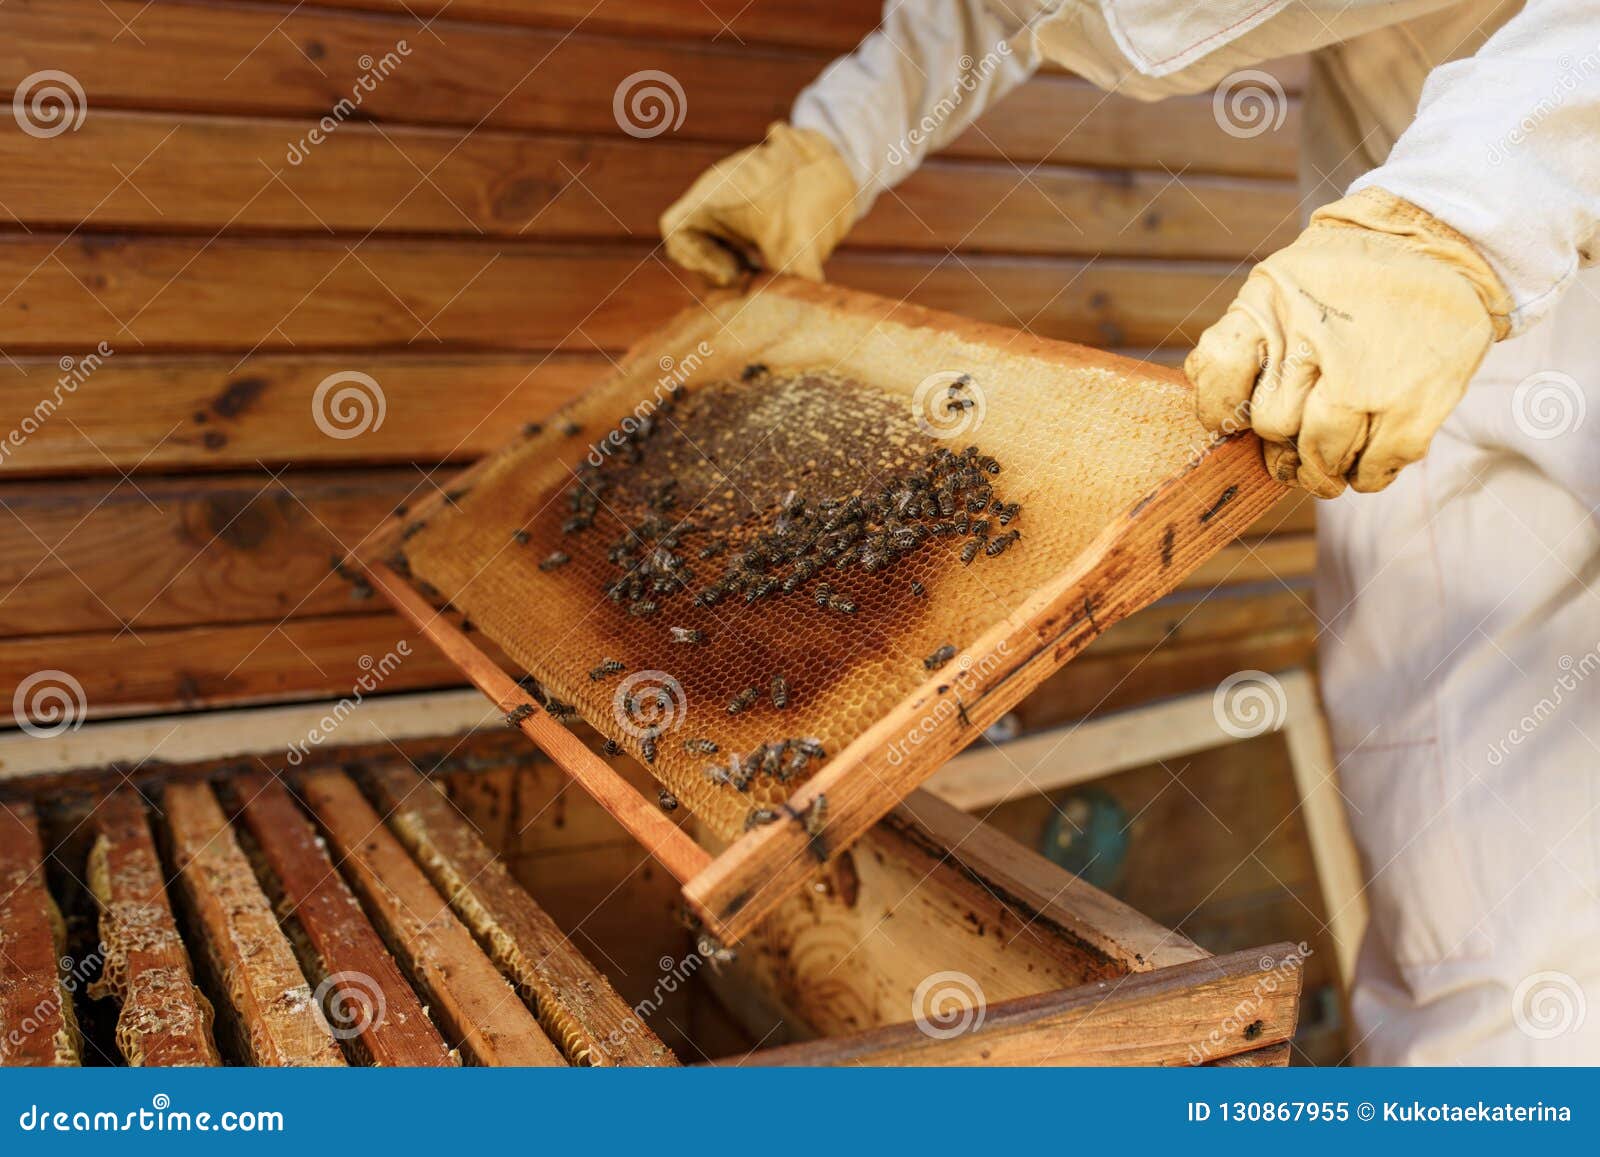 hands of beekeeper pulls out from the hive a wooden frame with honeycomb. collect honey. beekeeping concept